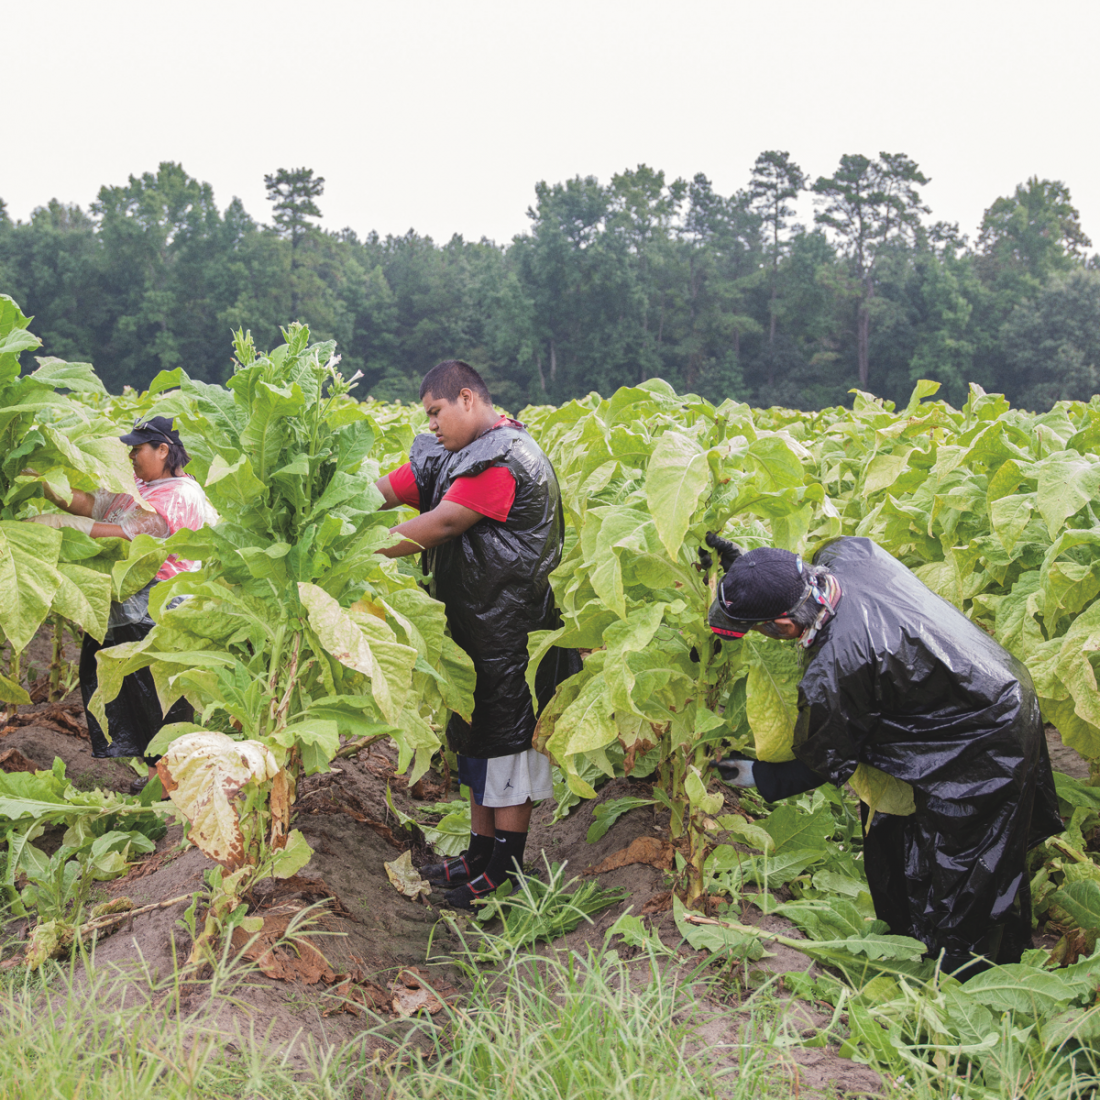 Goldsboro, NC, USA Miguel, a fourteen-year-old Mexican migrant worker, picking leaves in a tobacco field with his aunt and uncle. © Rocco Rorandelli